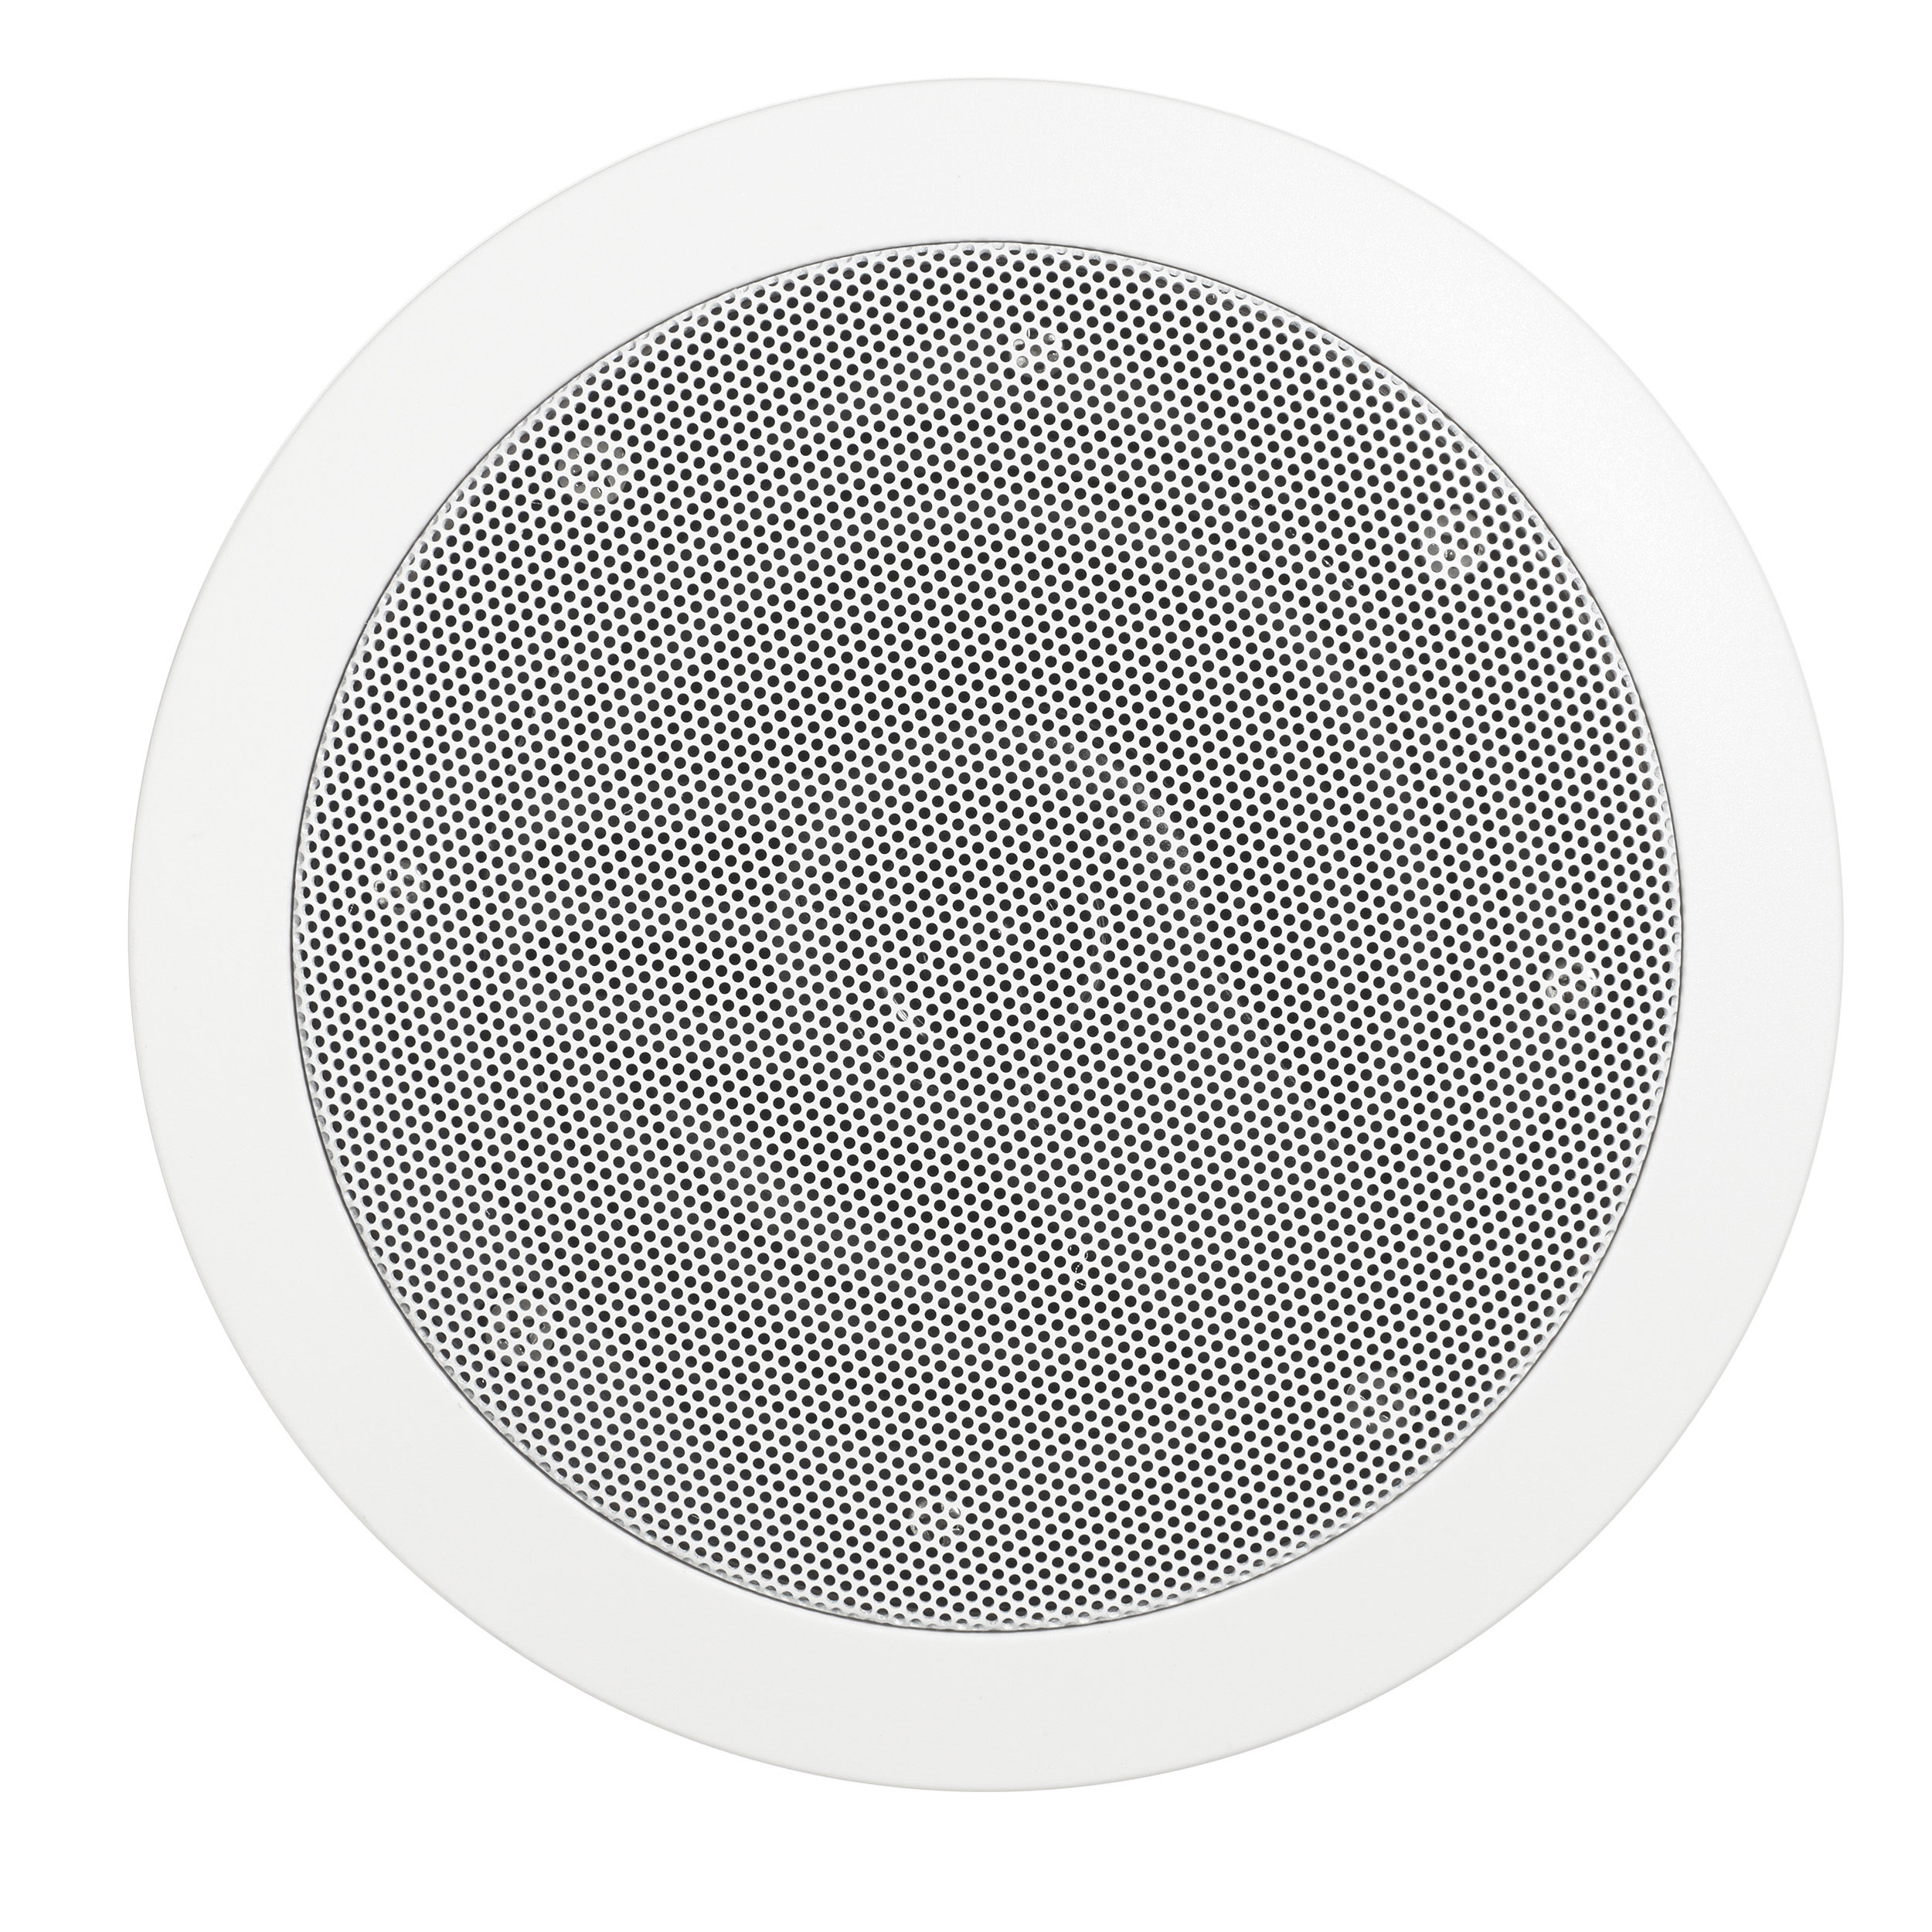 Mr Steam MSSPEAKERSRD-WH MusicTherapy Round Audio Speakers With Powerful Bass In White